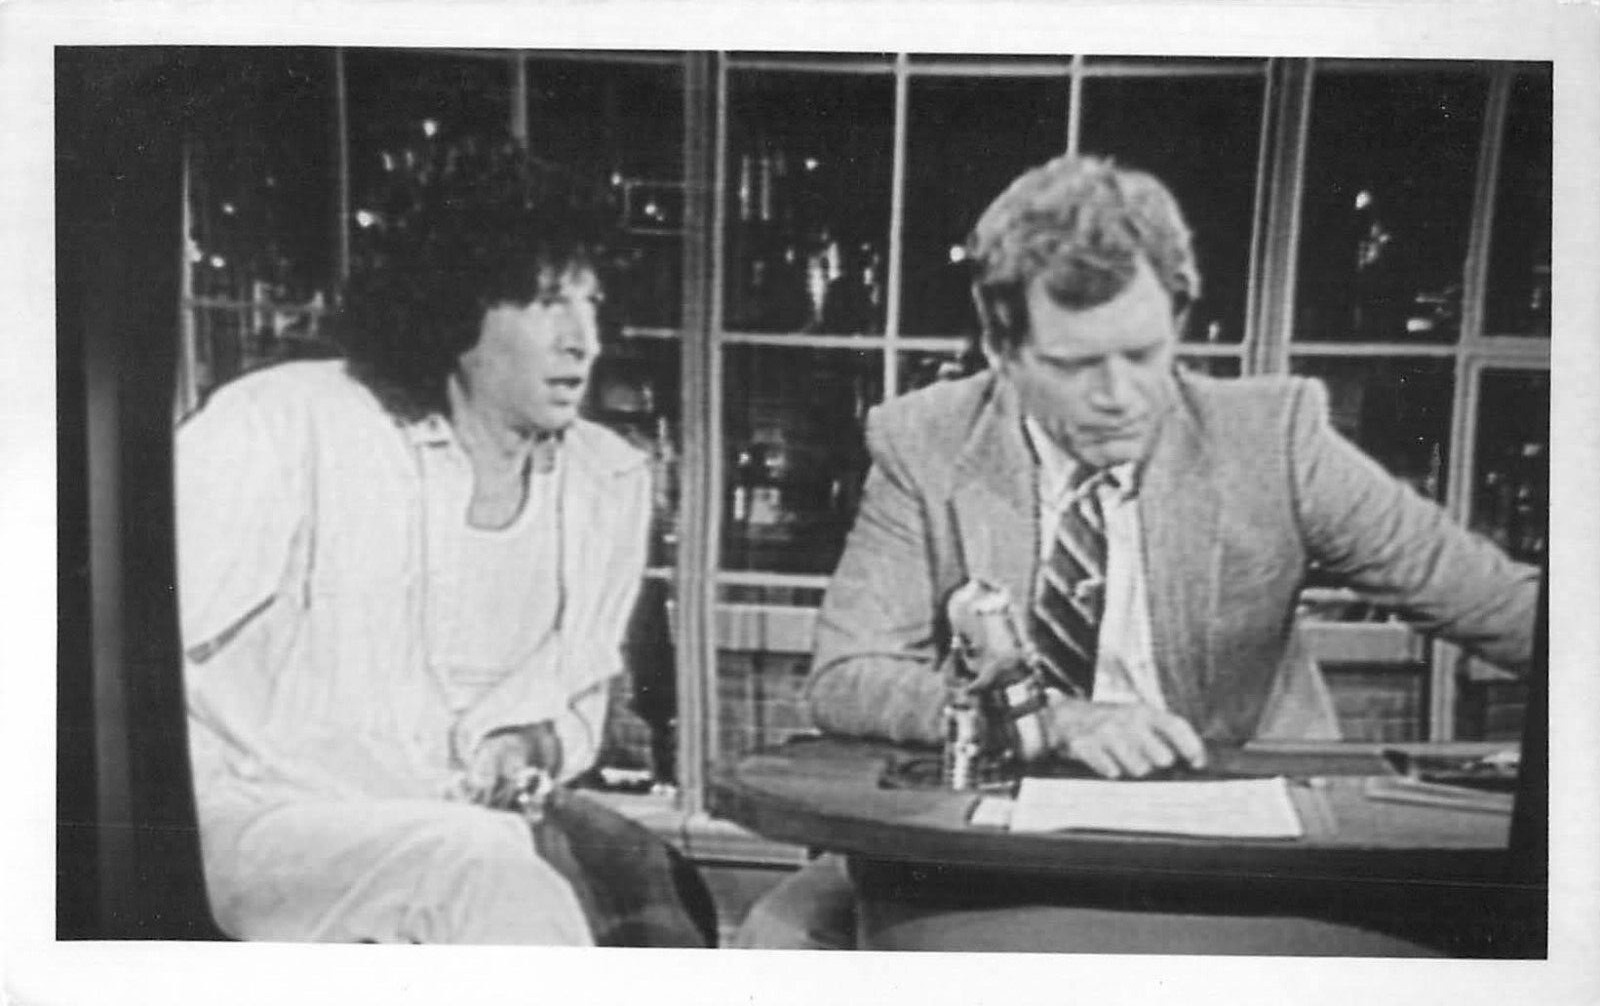 Howard Stern Television Appearance with David Letterman Vintage RPPC Postcard